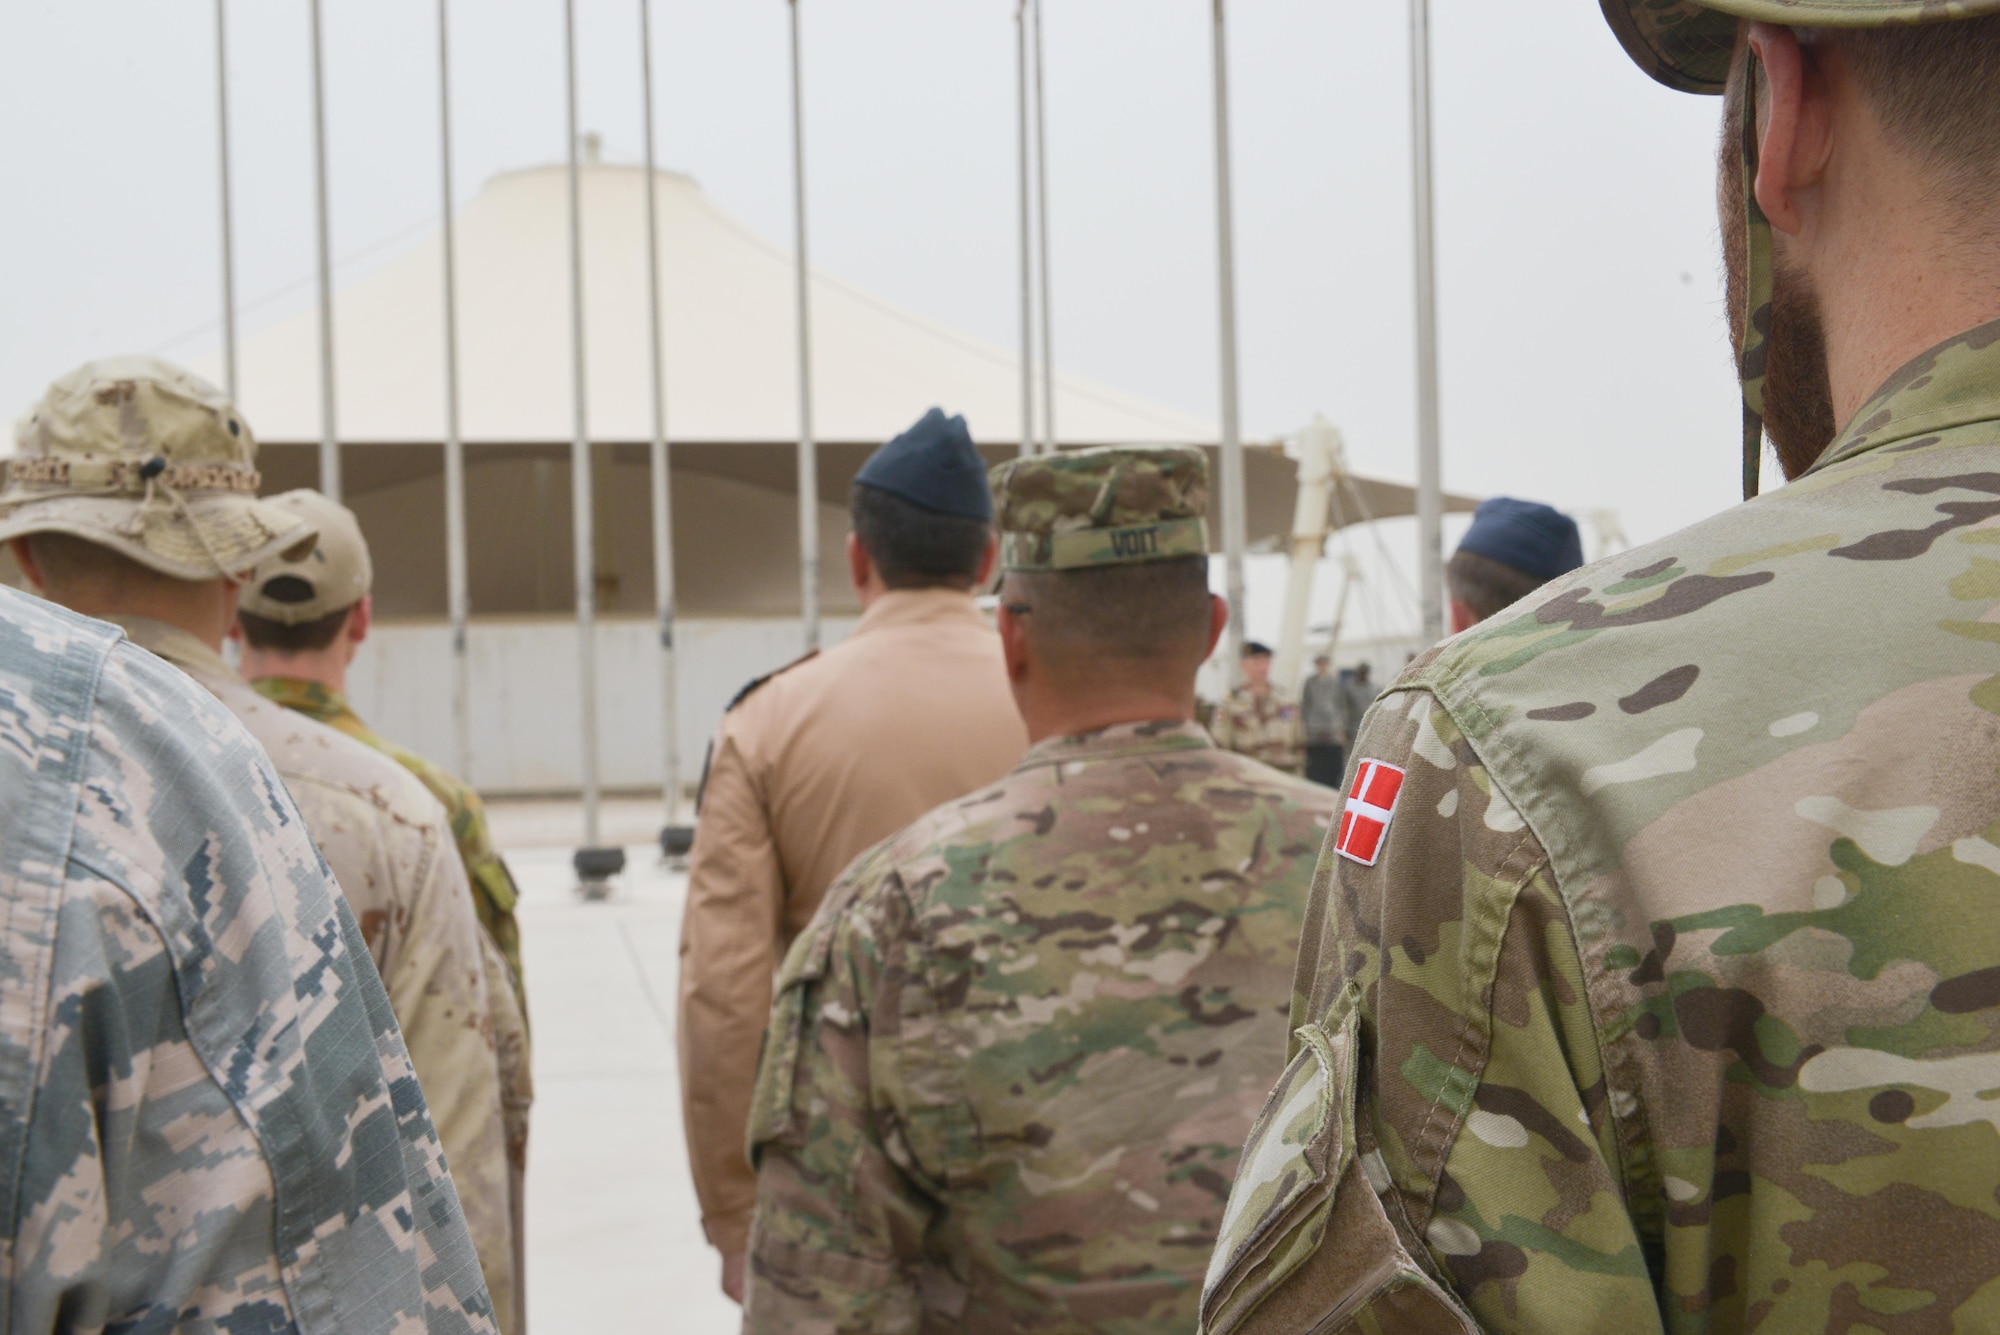 Combined Air Operations Center members stand in formation during the Bastille Day ceremony July 14, 2015 at Al Udeid Air Base, Qatar. The French celebrate July 14th as Bastille Day to commemorate the storming of Bastille at the beginning of the French revolution in 1789. (U.S. Air Force photo/Staff Sgt. Alexandre Montes)